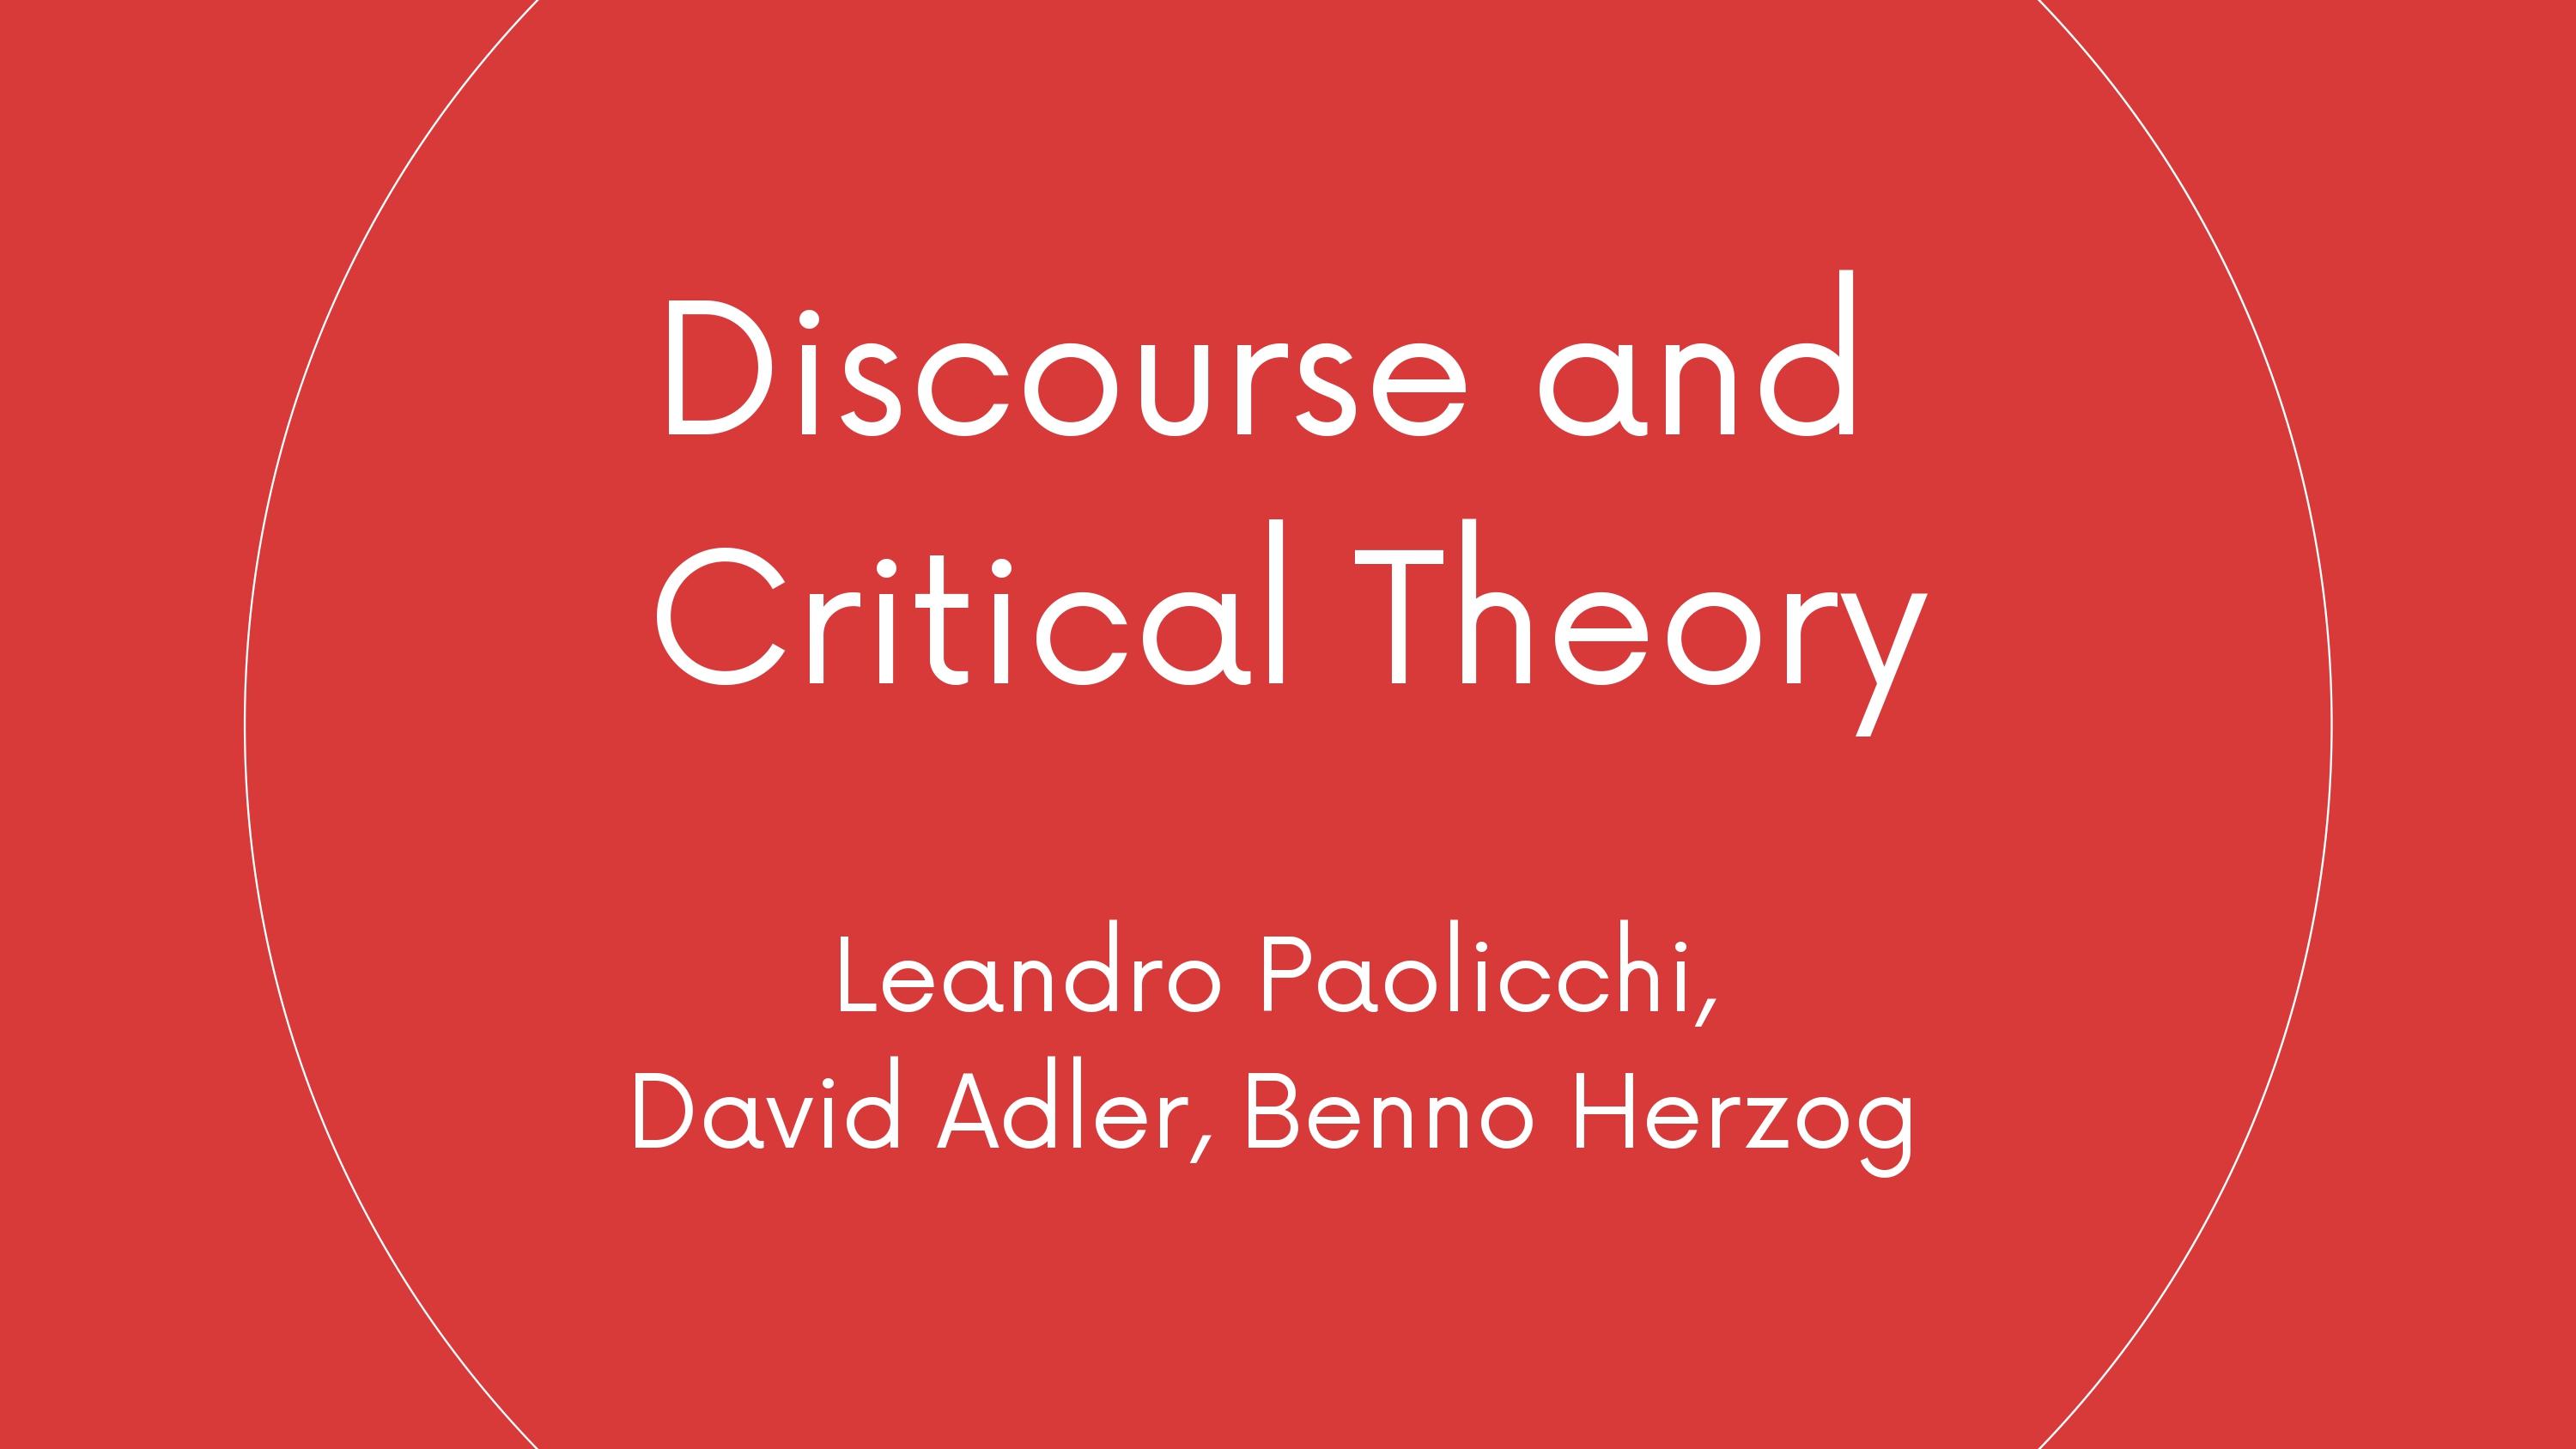 Discourses and critical theory